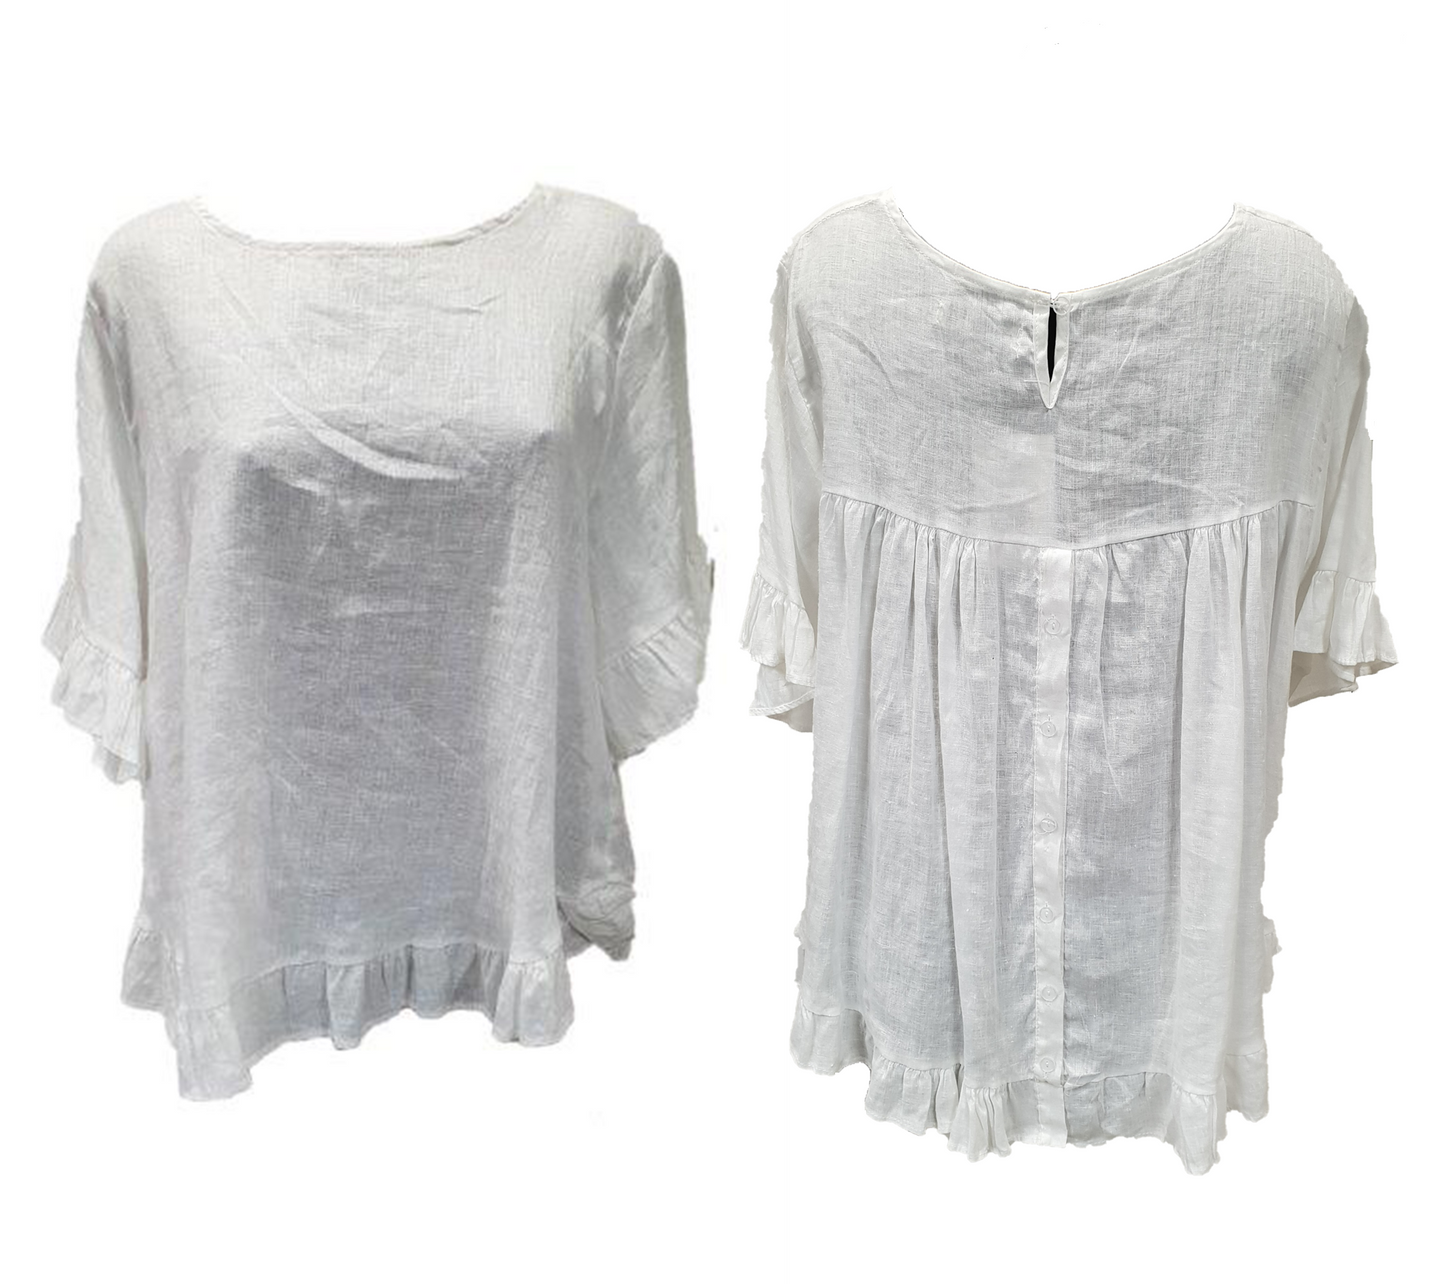 ‘TULLY’ Top - White